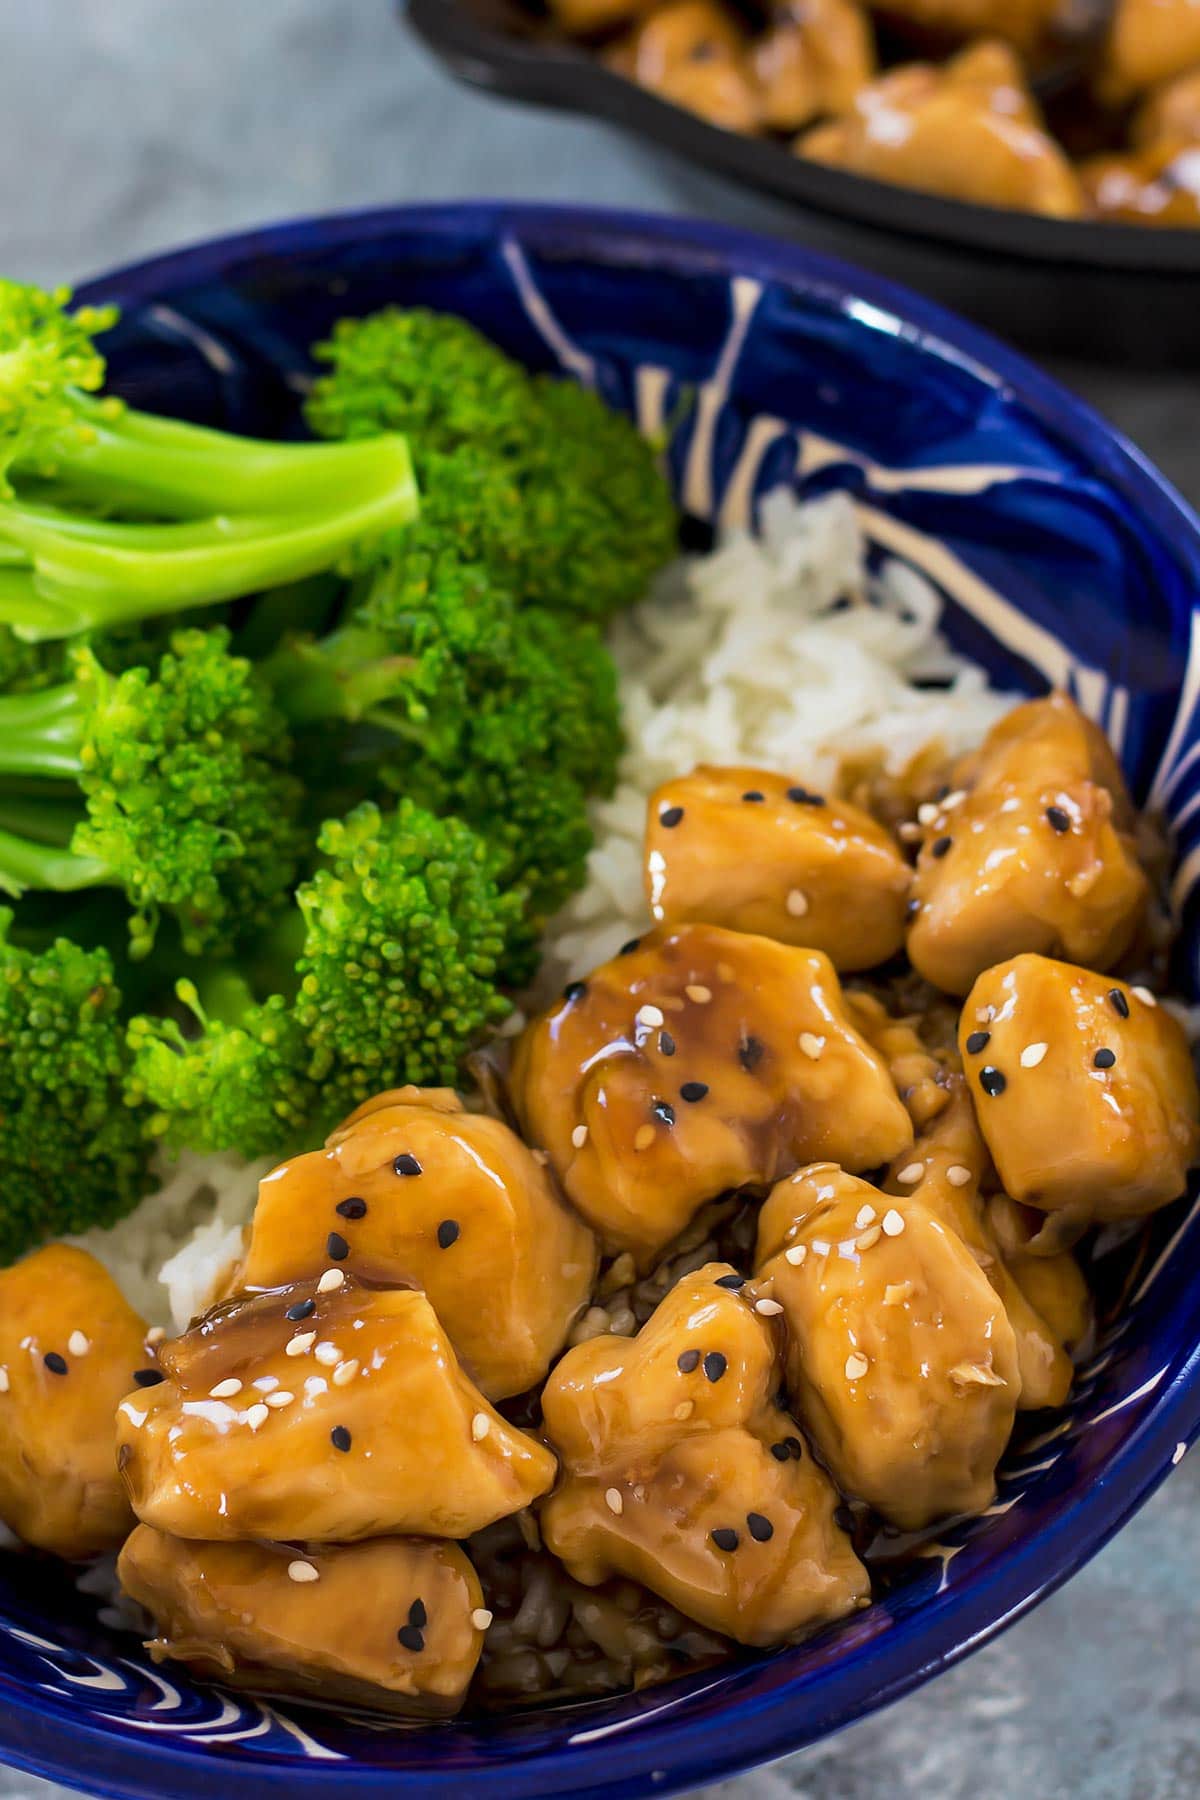 Teriyaki chicken in blue bowl of rice with broccoli